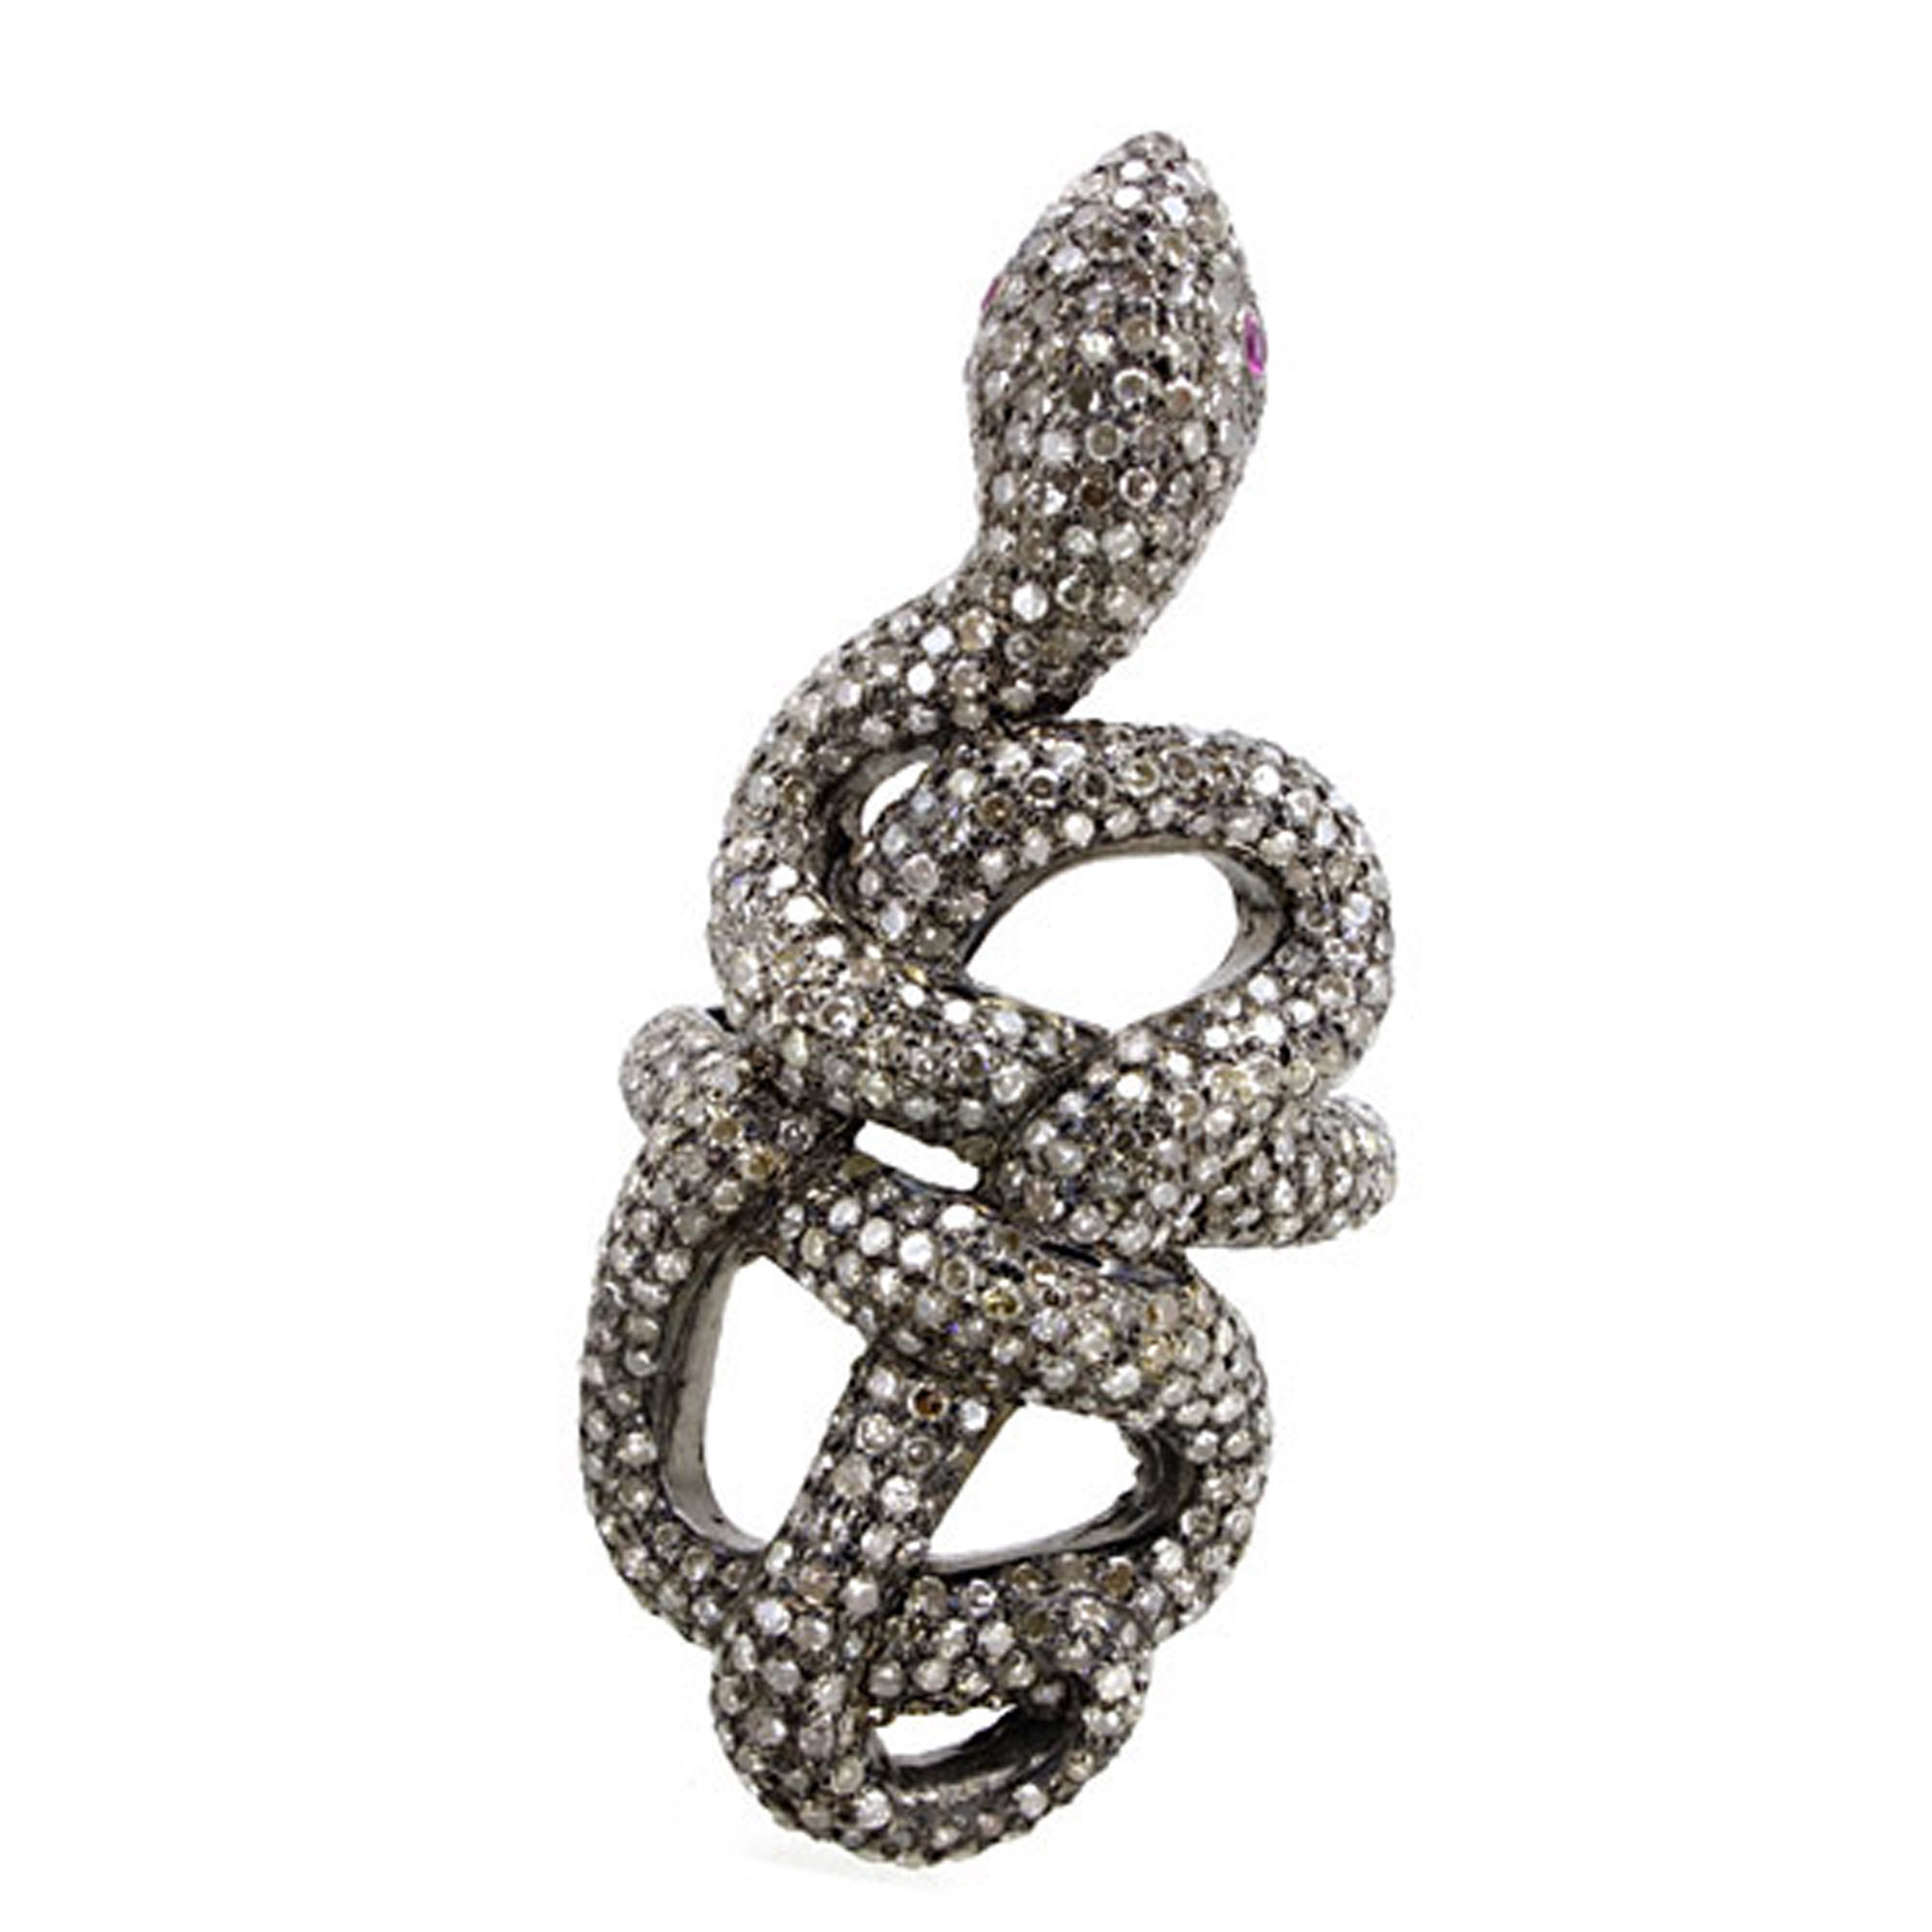 Natural diamond 925 silver snake ring vintage jewelry